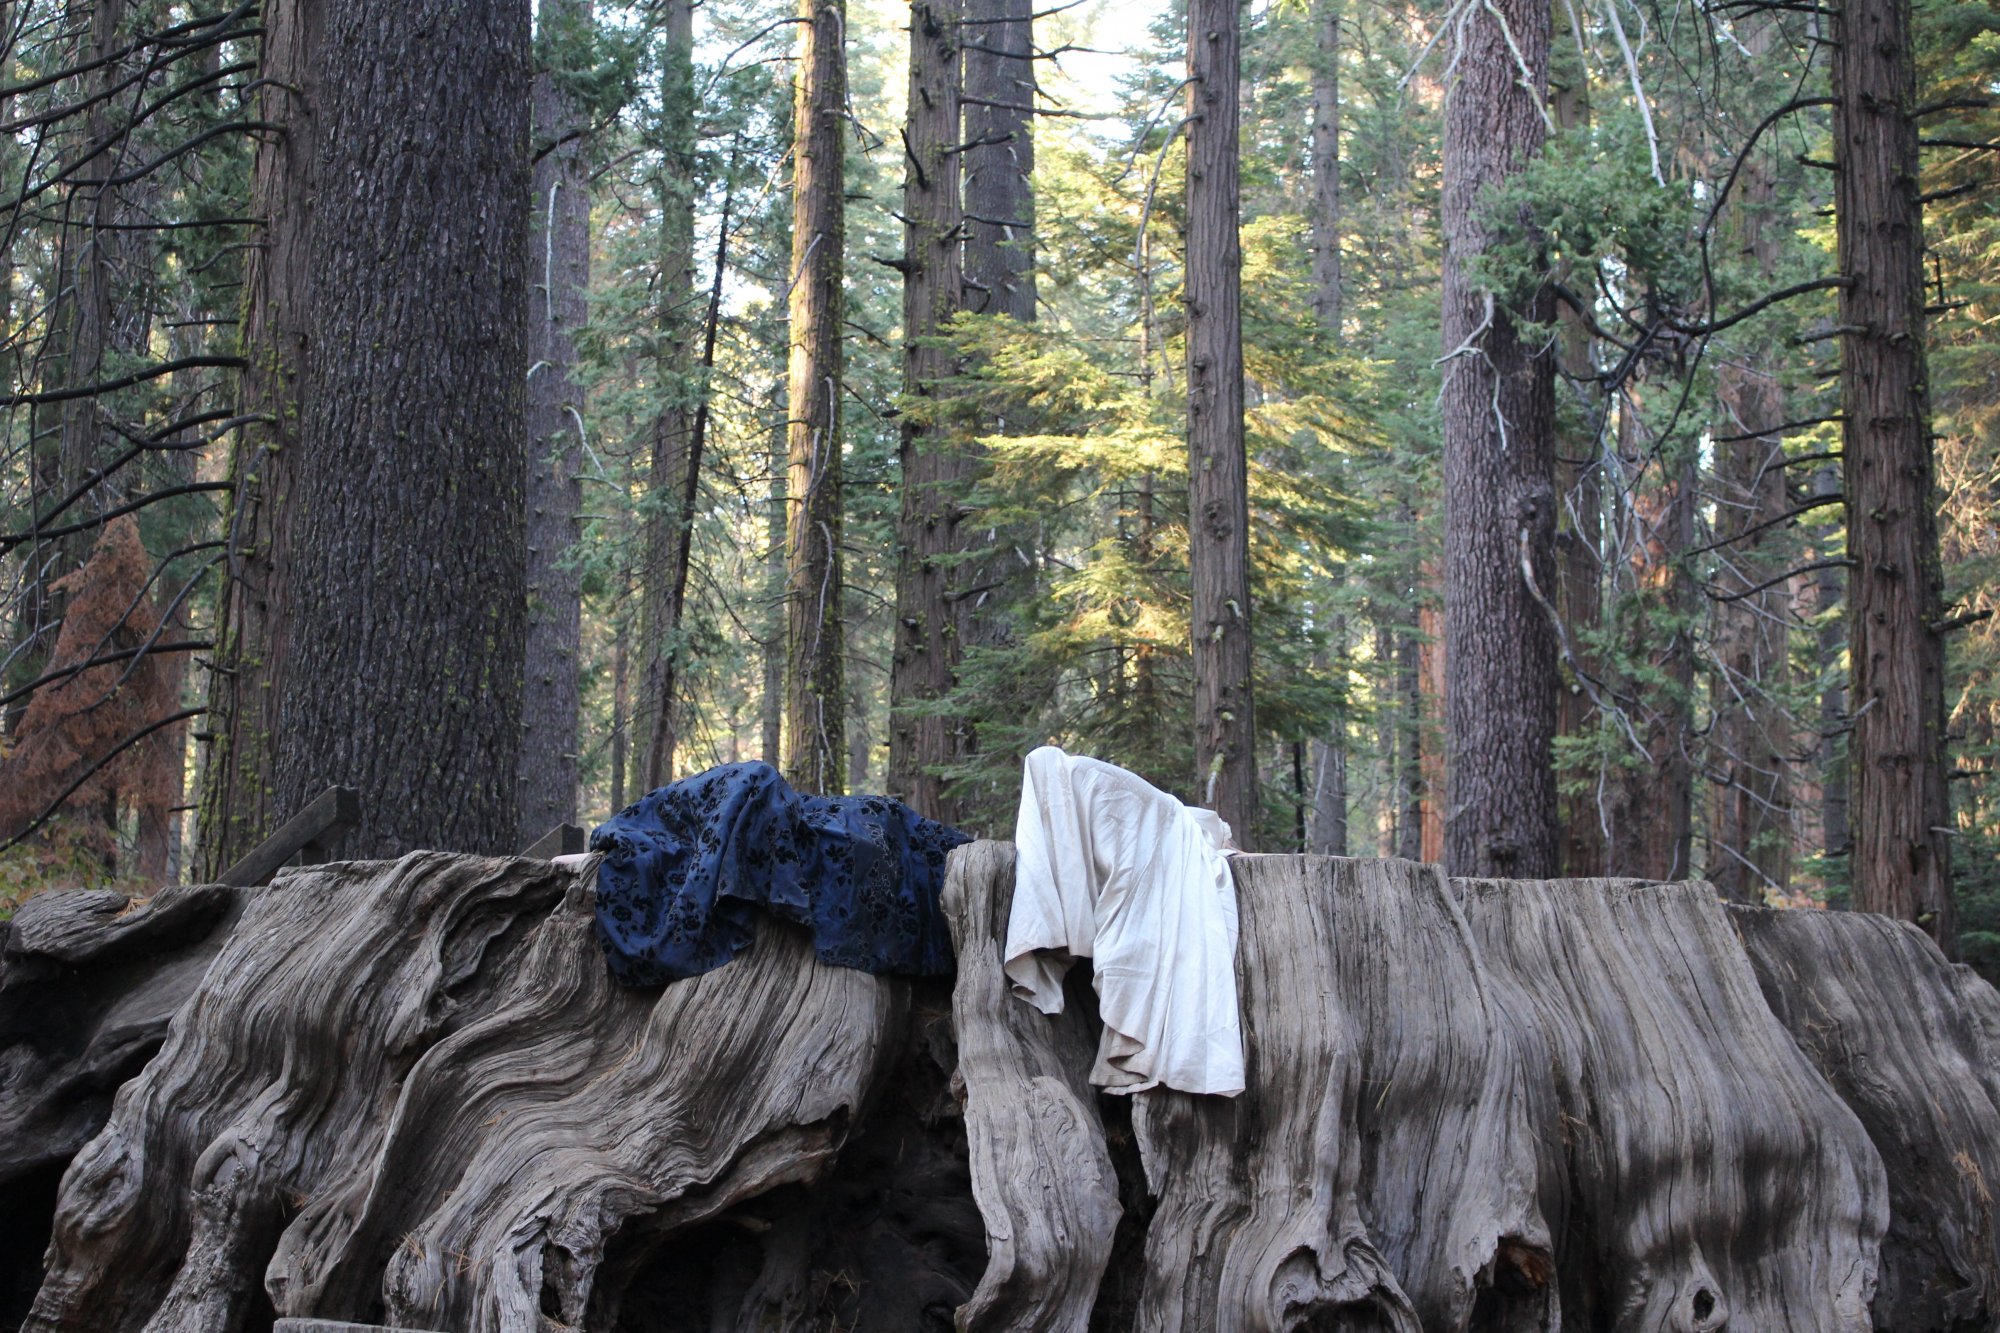 Discarded clothes draped on a masive tree trunk in a forest